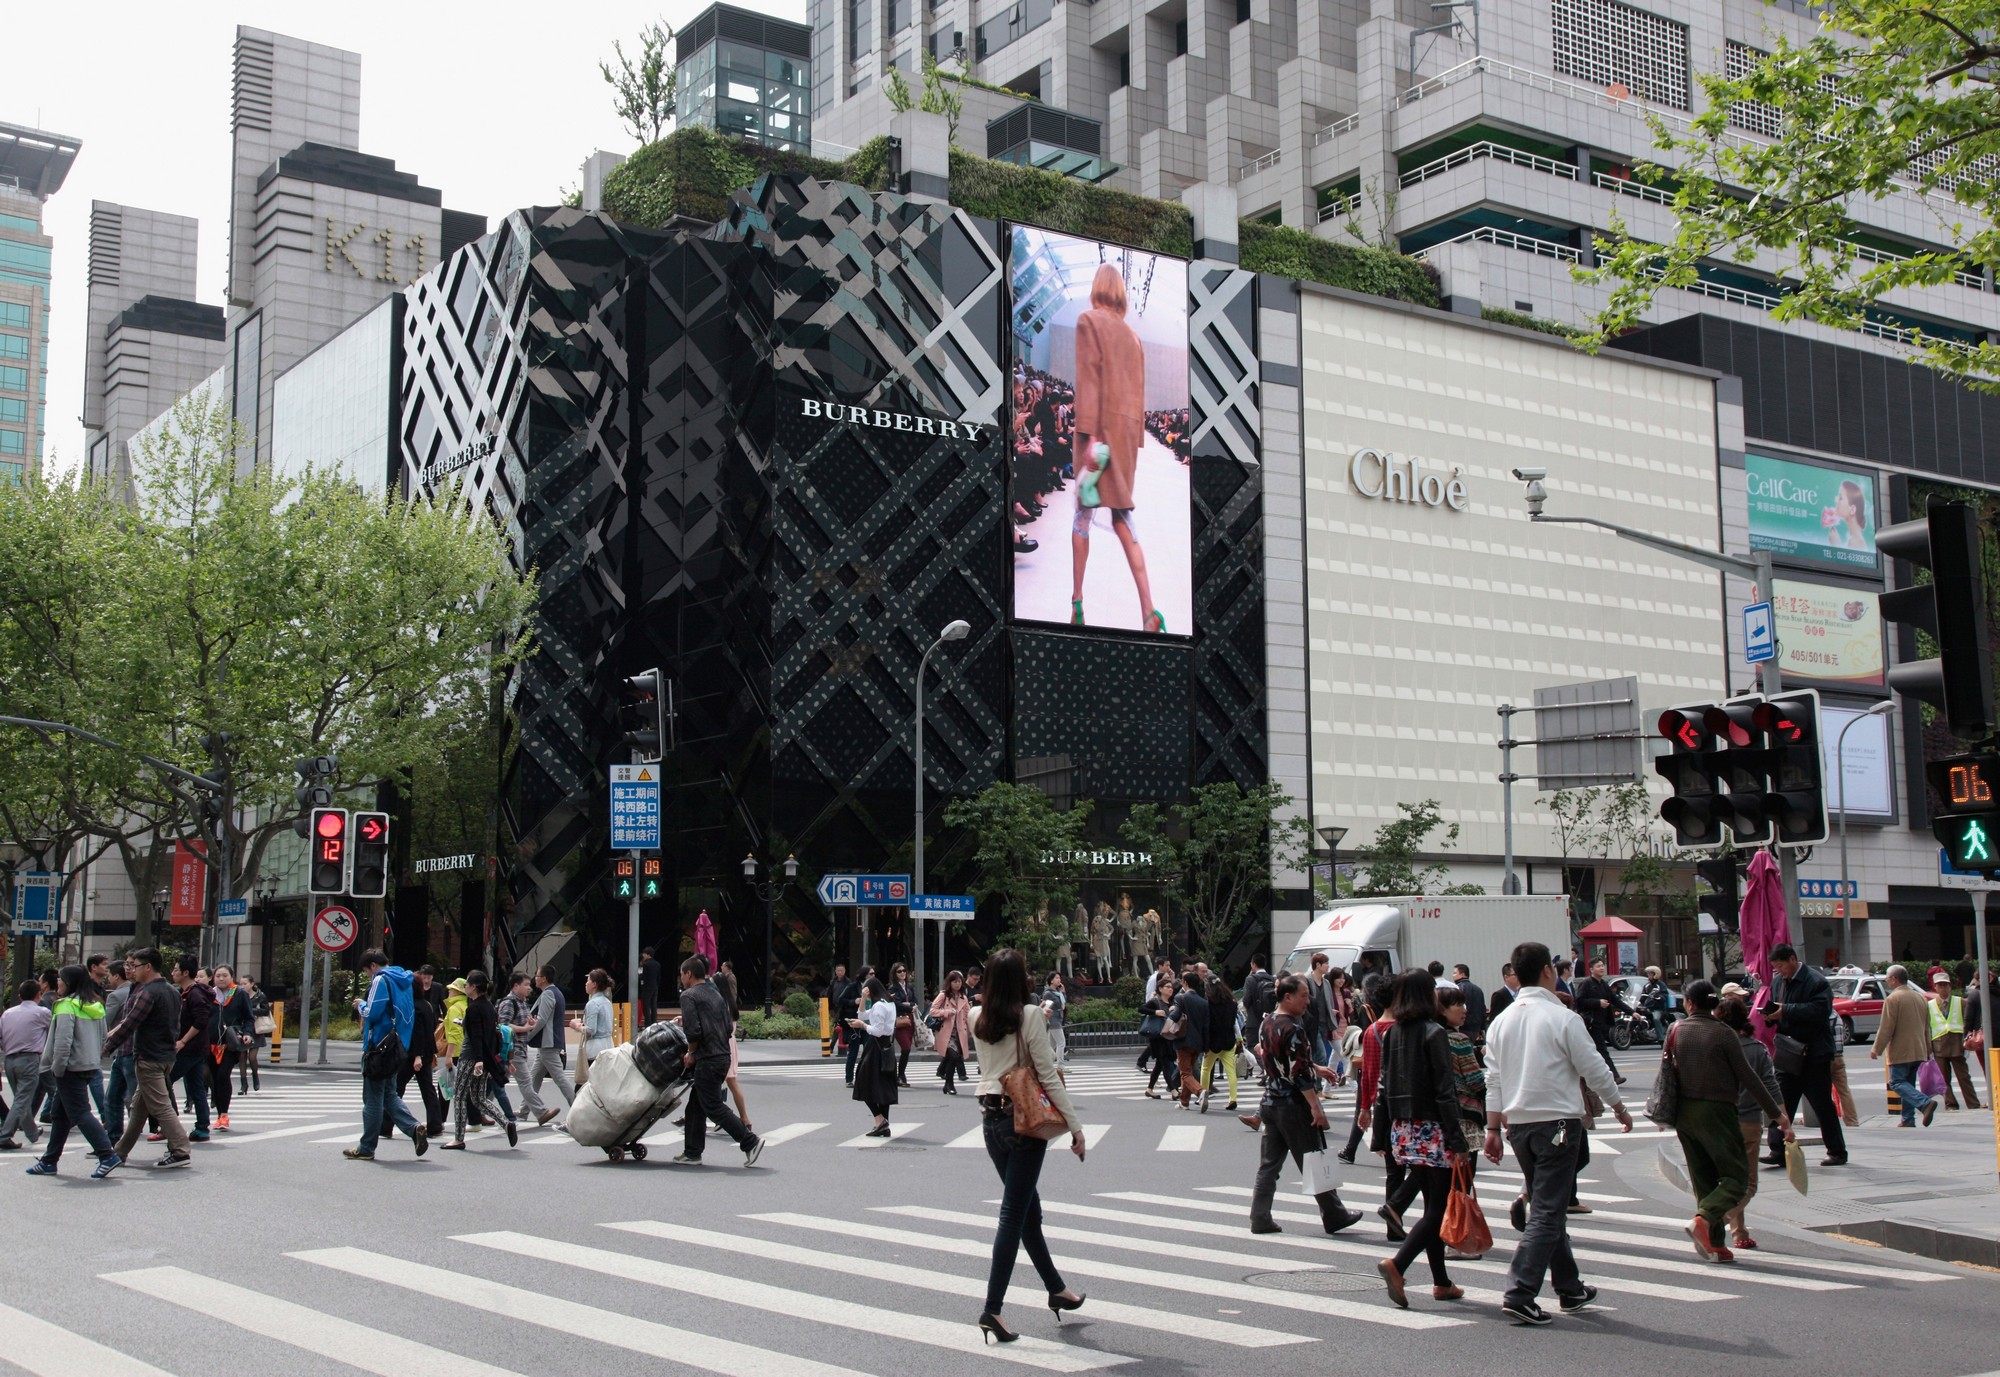 Pedestrians walk by the Burberry store in Shanghai